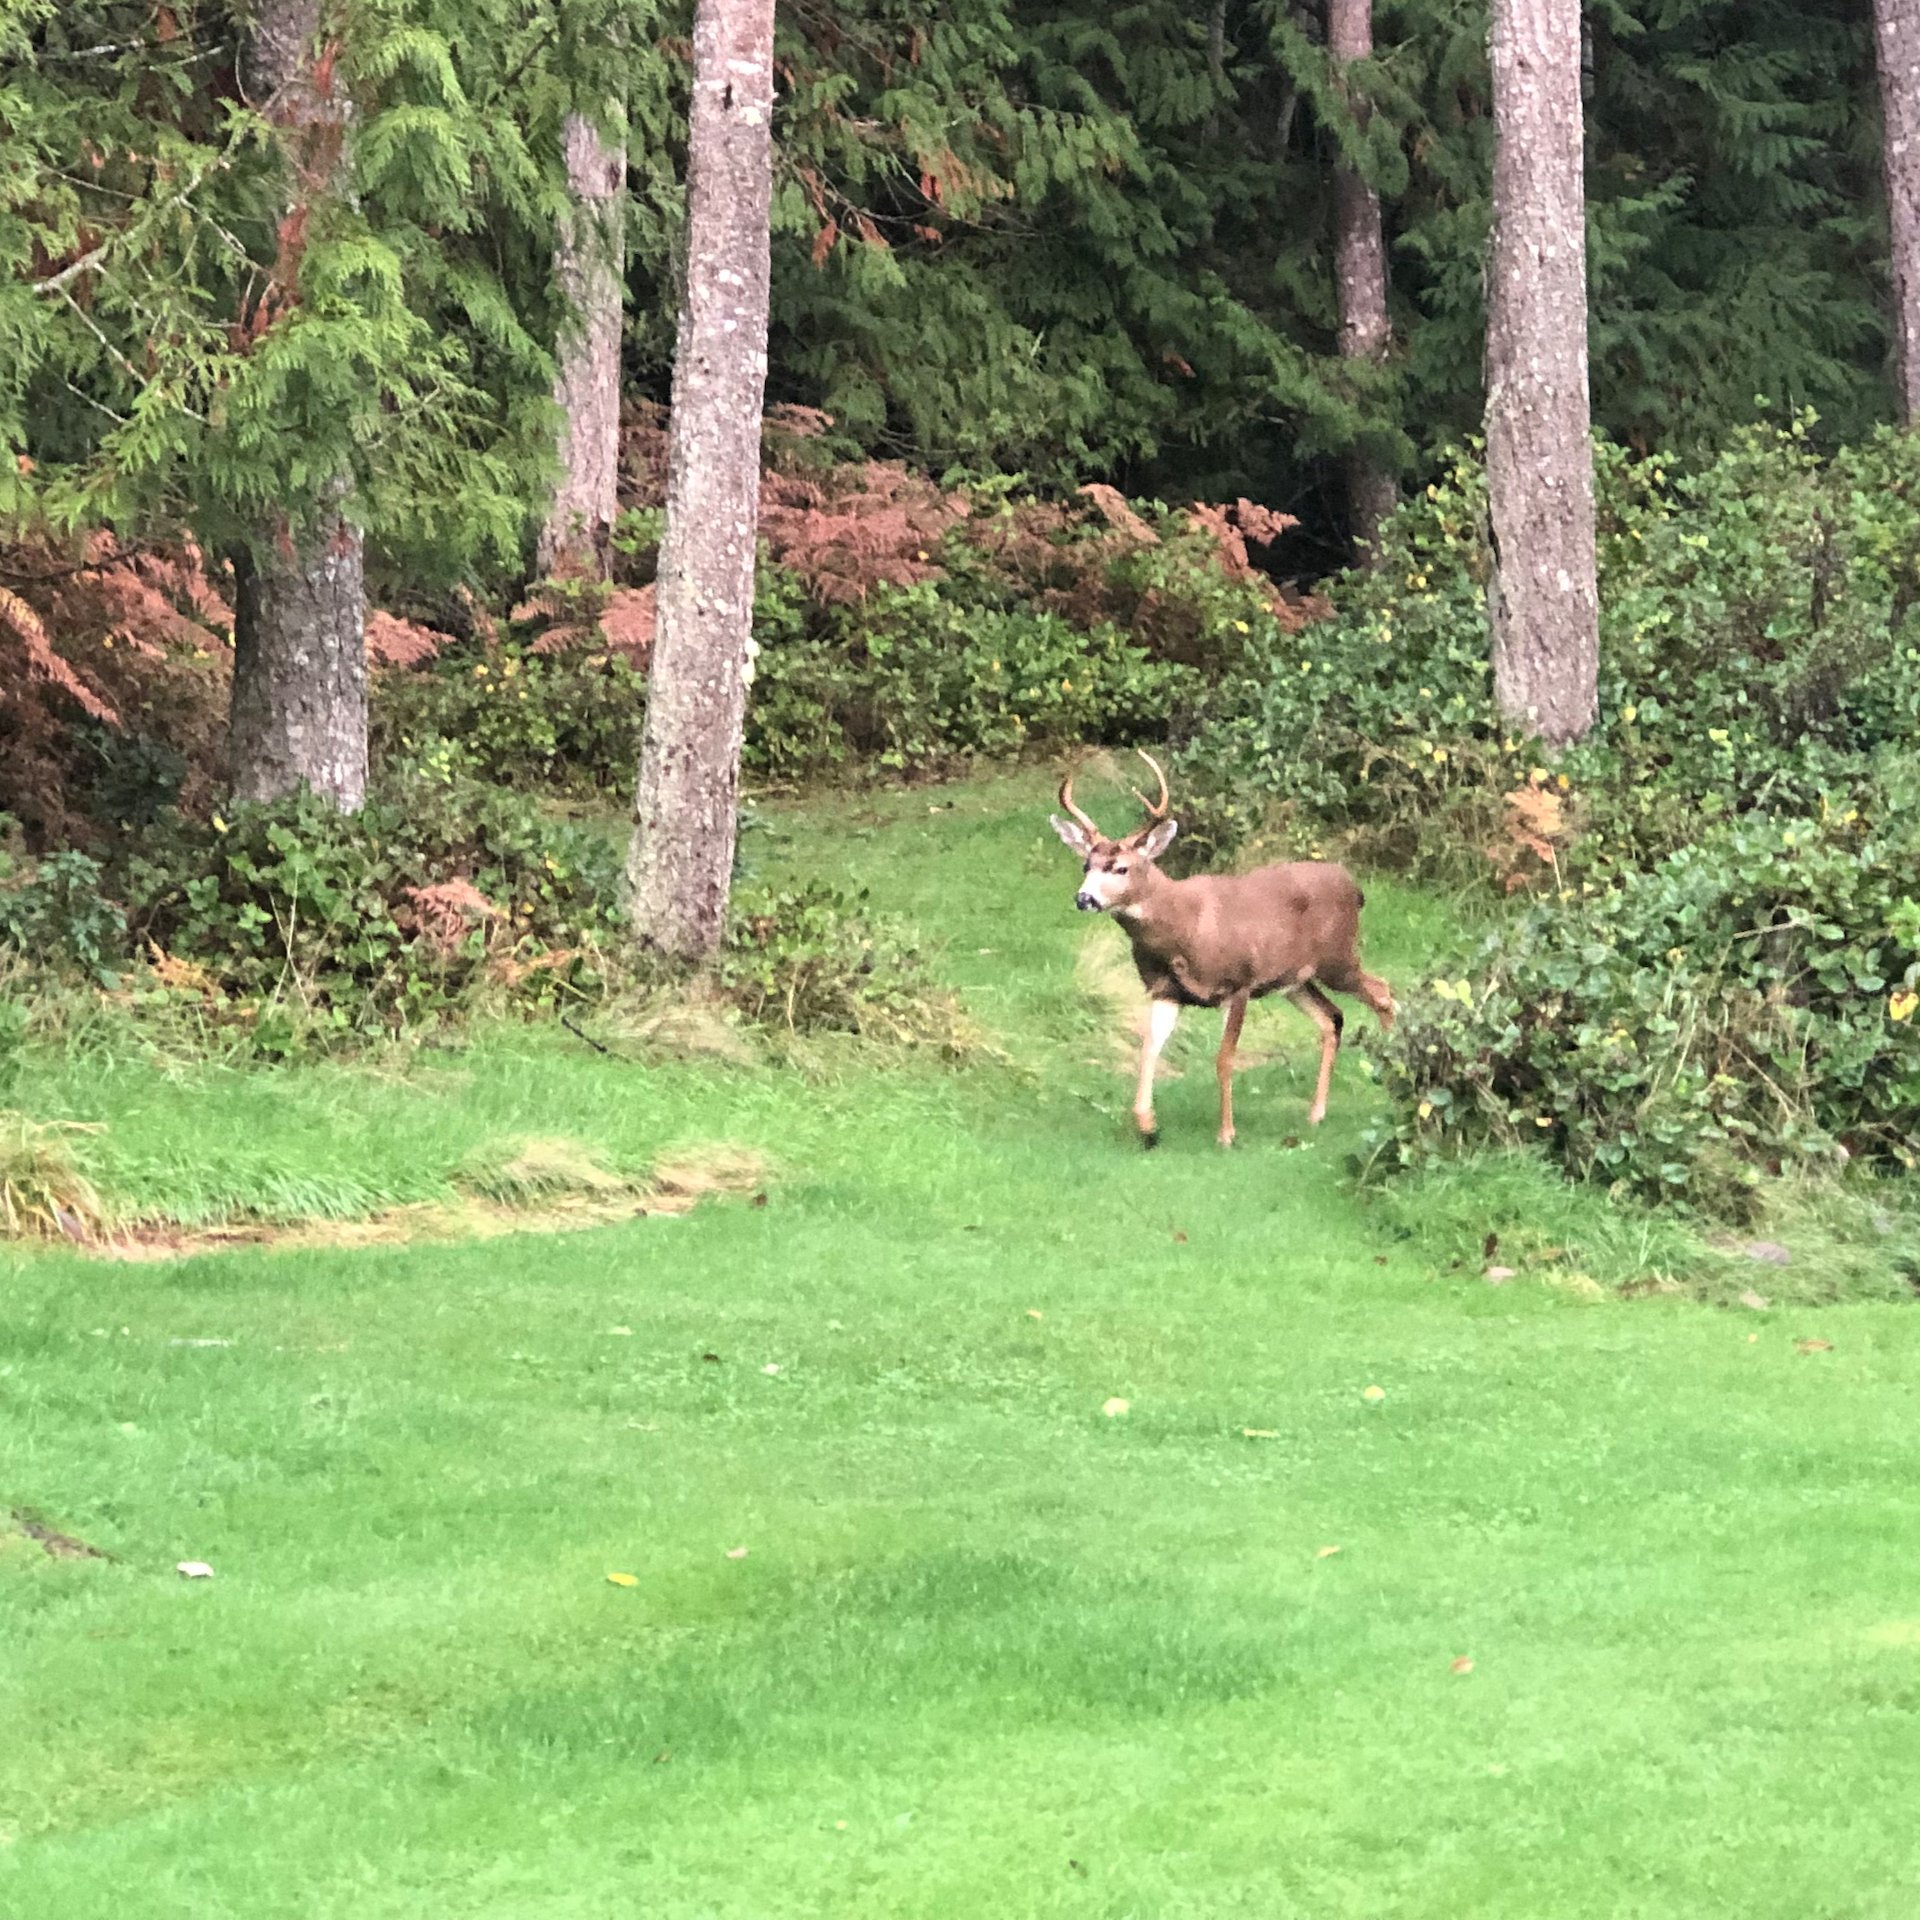  As usual, my only companions on the golf course were the deer. 